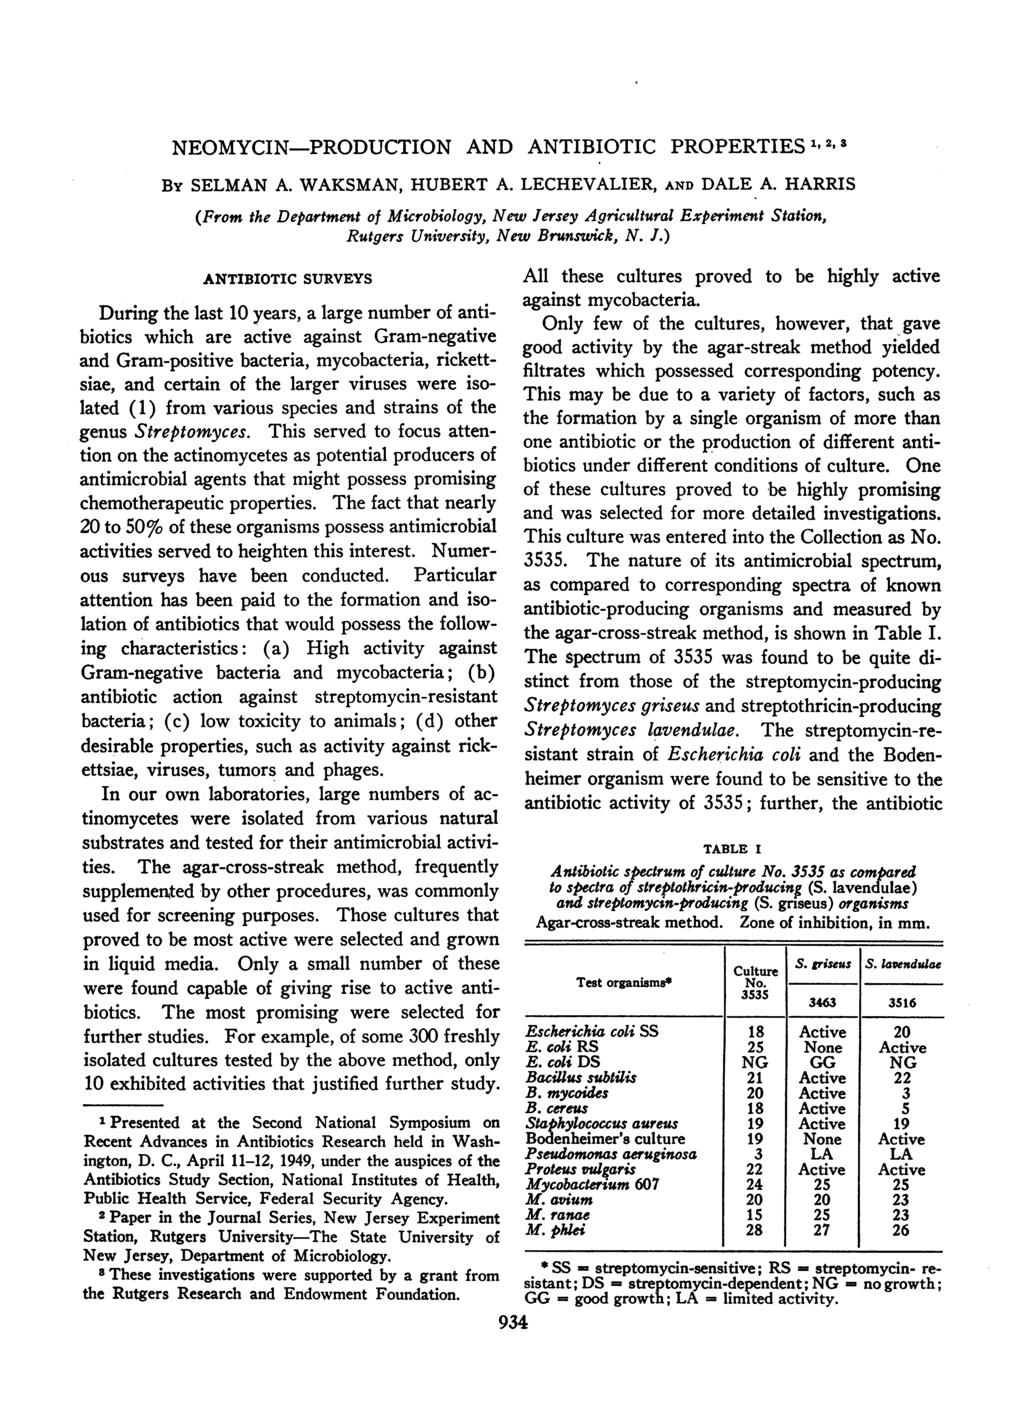 NEOMYCIN-PRODUCTION AND ANTIBIOTIC PROPERTIES 1, 2 3 By SELMAN A. WAKSMAN, HUBERT A. LECHEVALIER, AND DALE A.